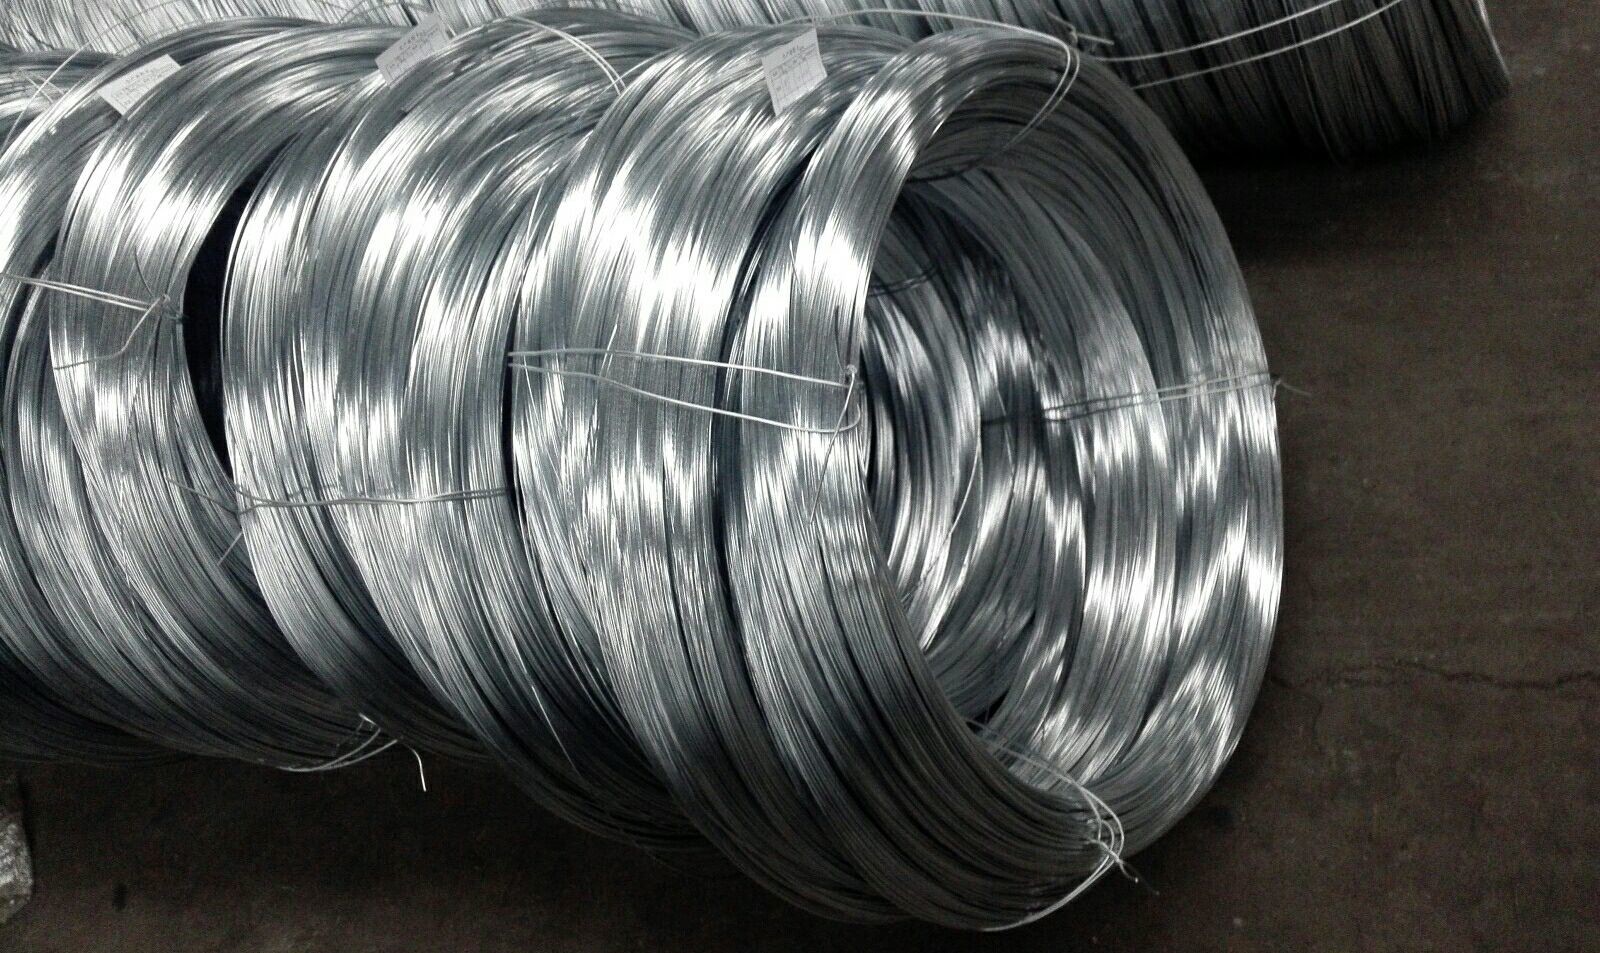  Heavy Zinc Coating Spring Galvanized Steel Wire 1.0-5.0mm Main Single For Stranded Conductors Manufactures